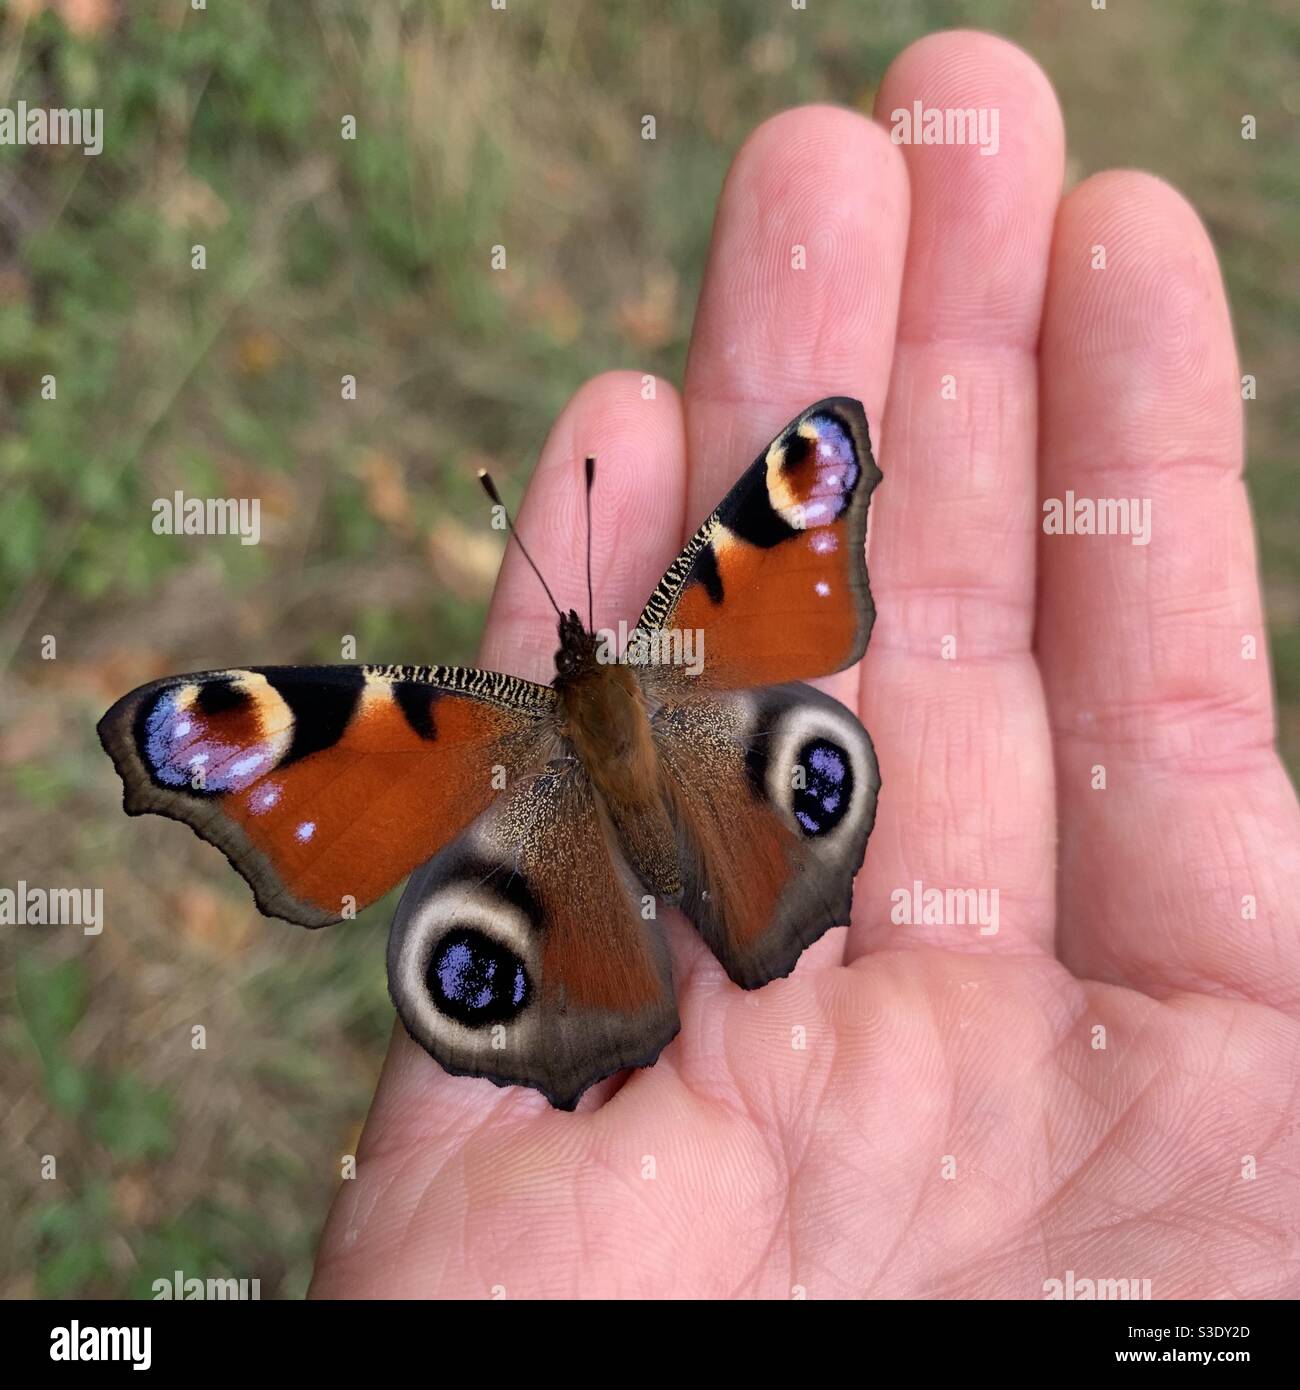 Peacock butterfly on hand Stock Photo